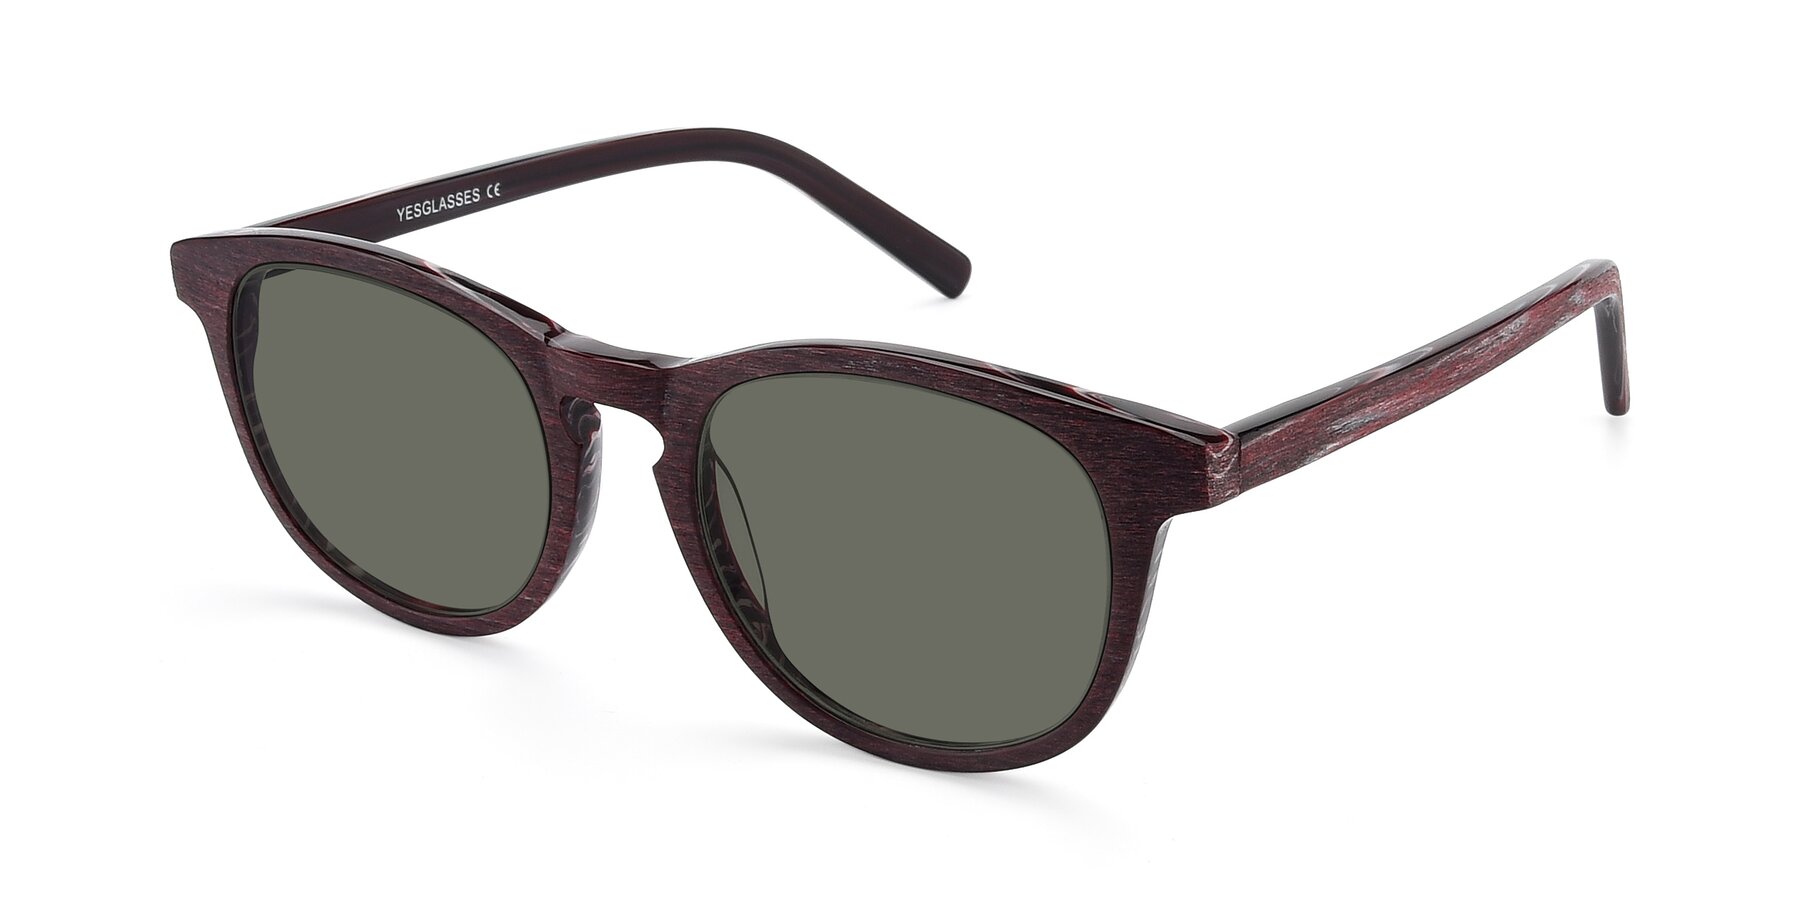 Angle of SR6044 in Wine-Wooden with Gray Polarized Lenses